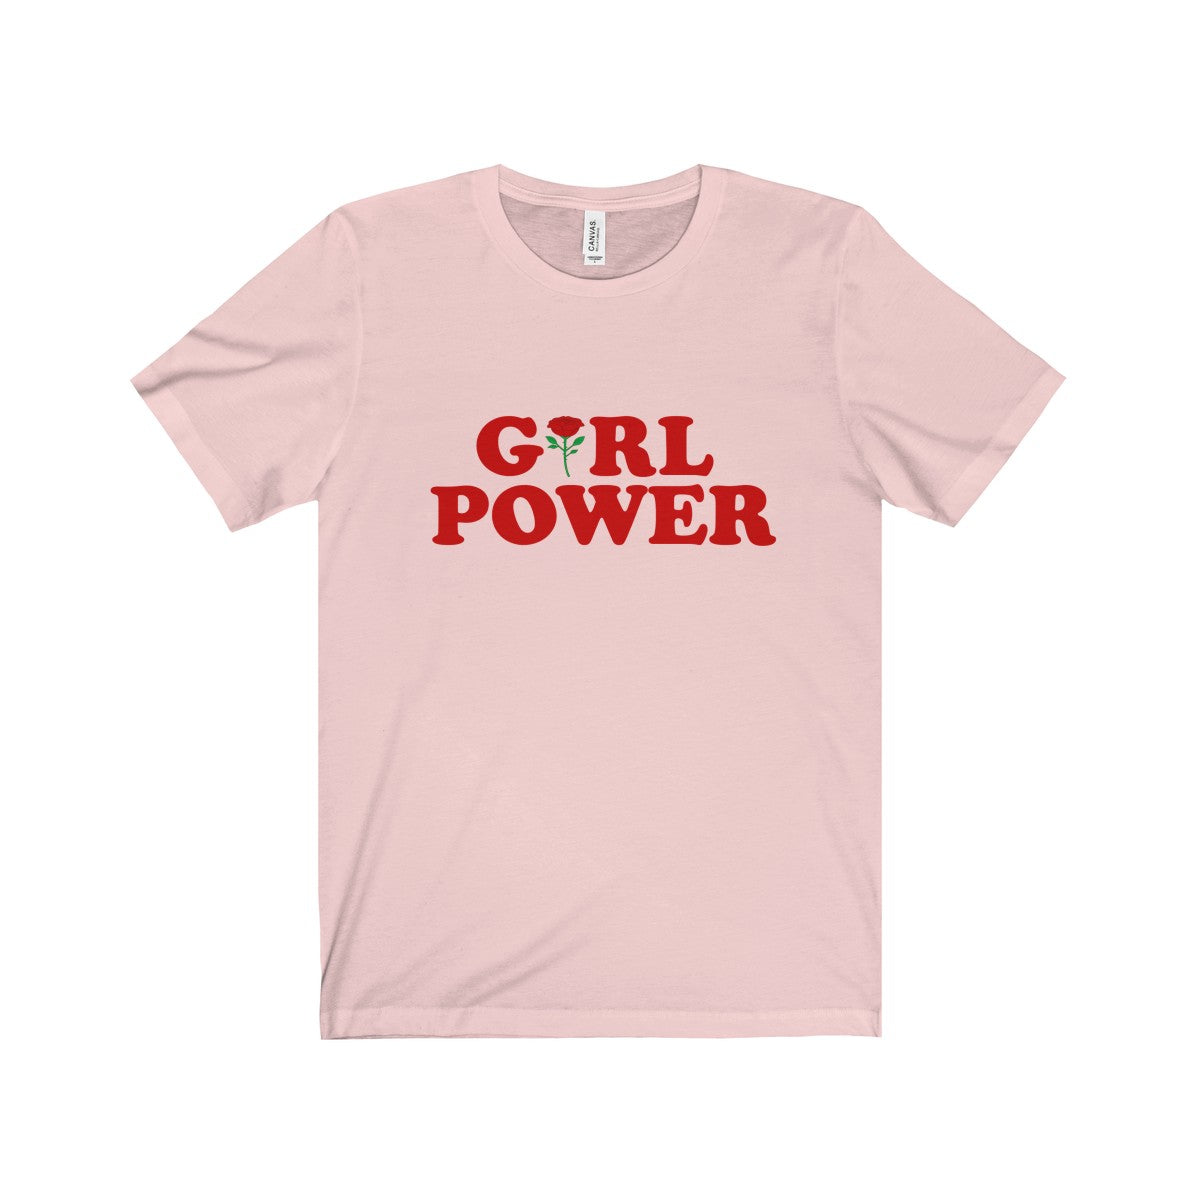 Girl Power Vintage Inspired T Shirt - Shop Bed Head Society